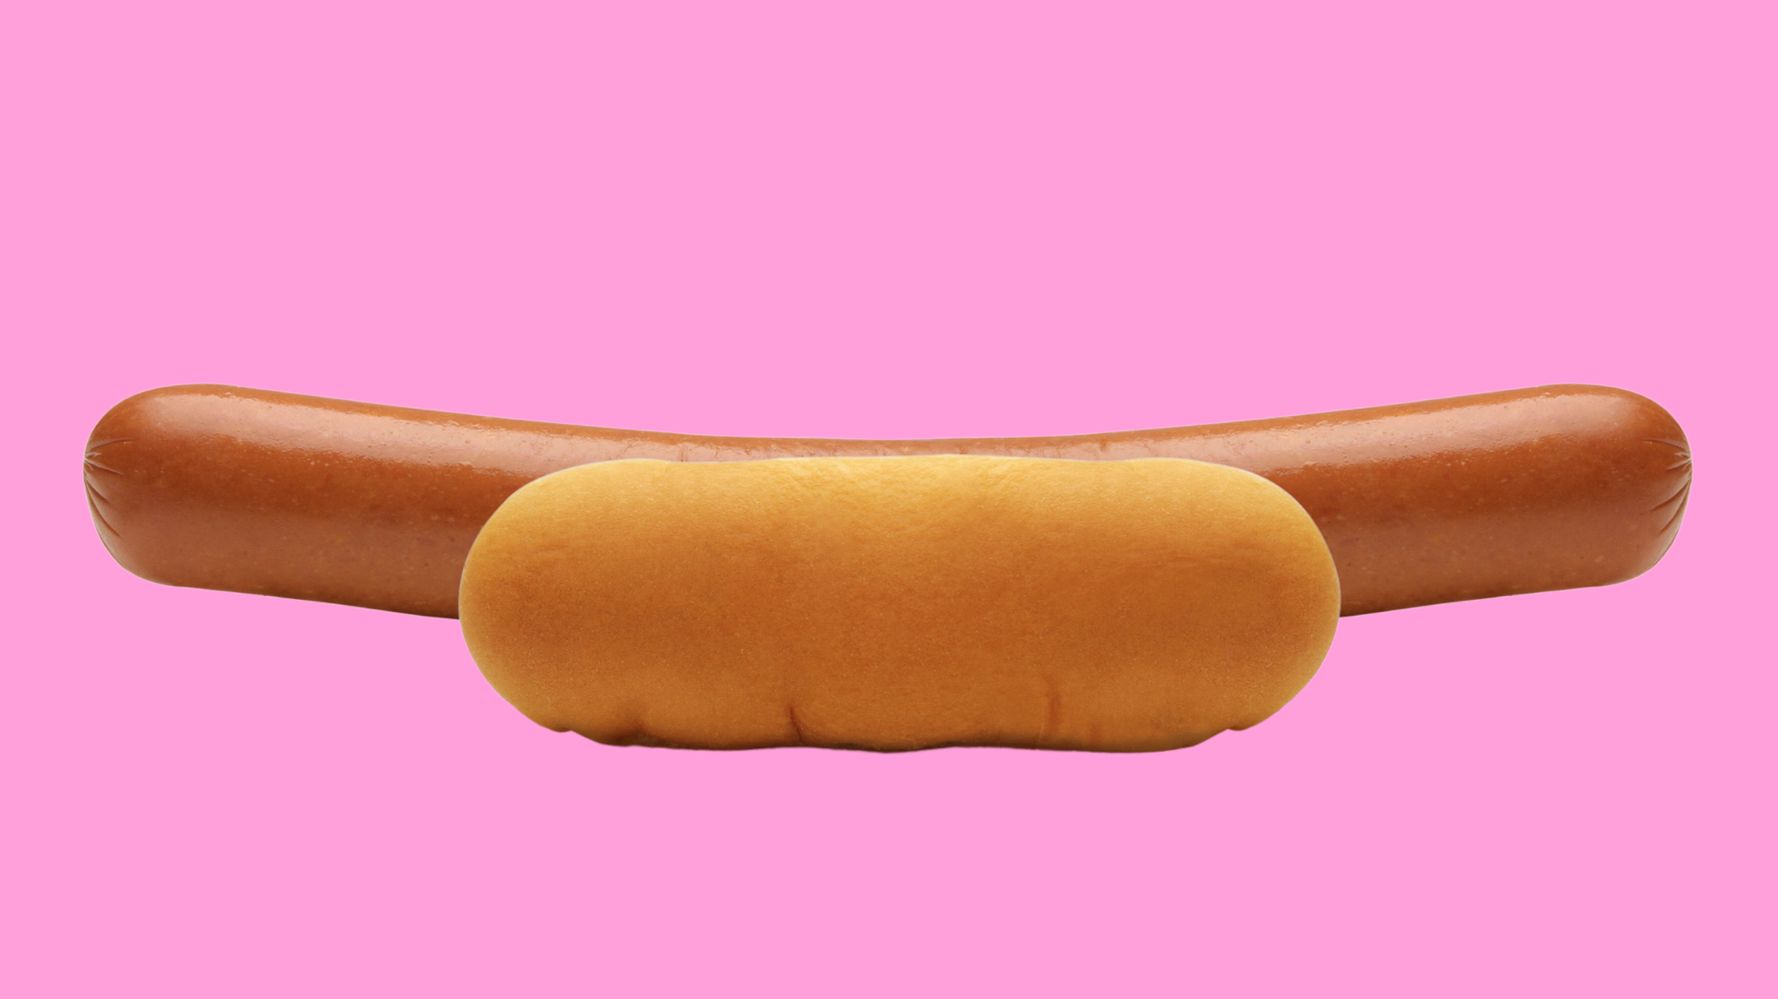 Natural Casing Hot Dog Party Pack - Vienna Beef